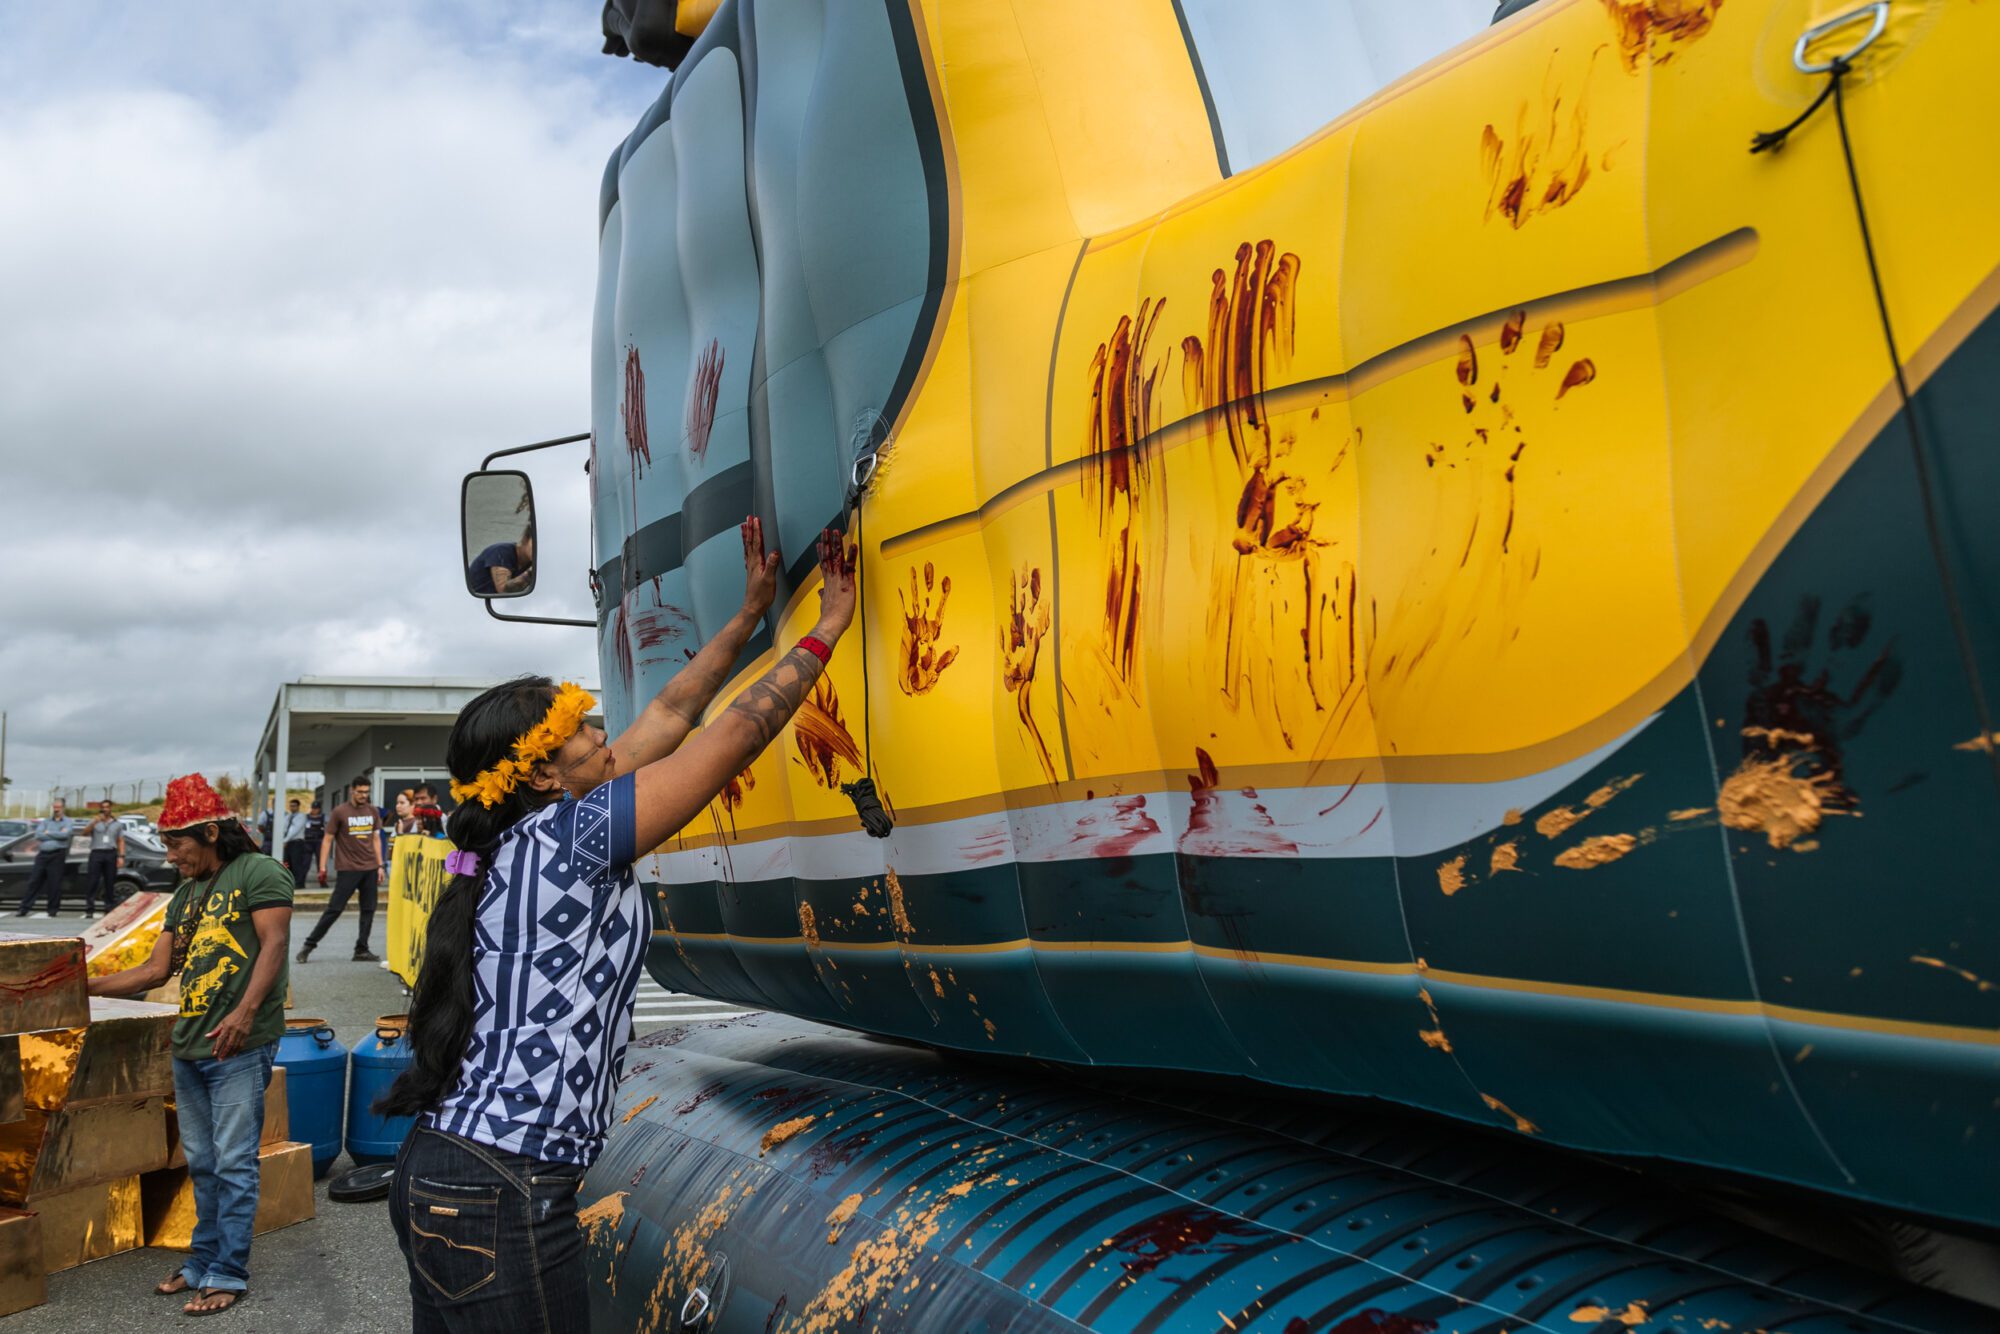 Indigenous activists in traditional headwear mark the side of a yellow excavator with red handprints.